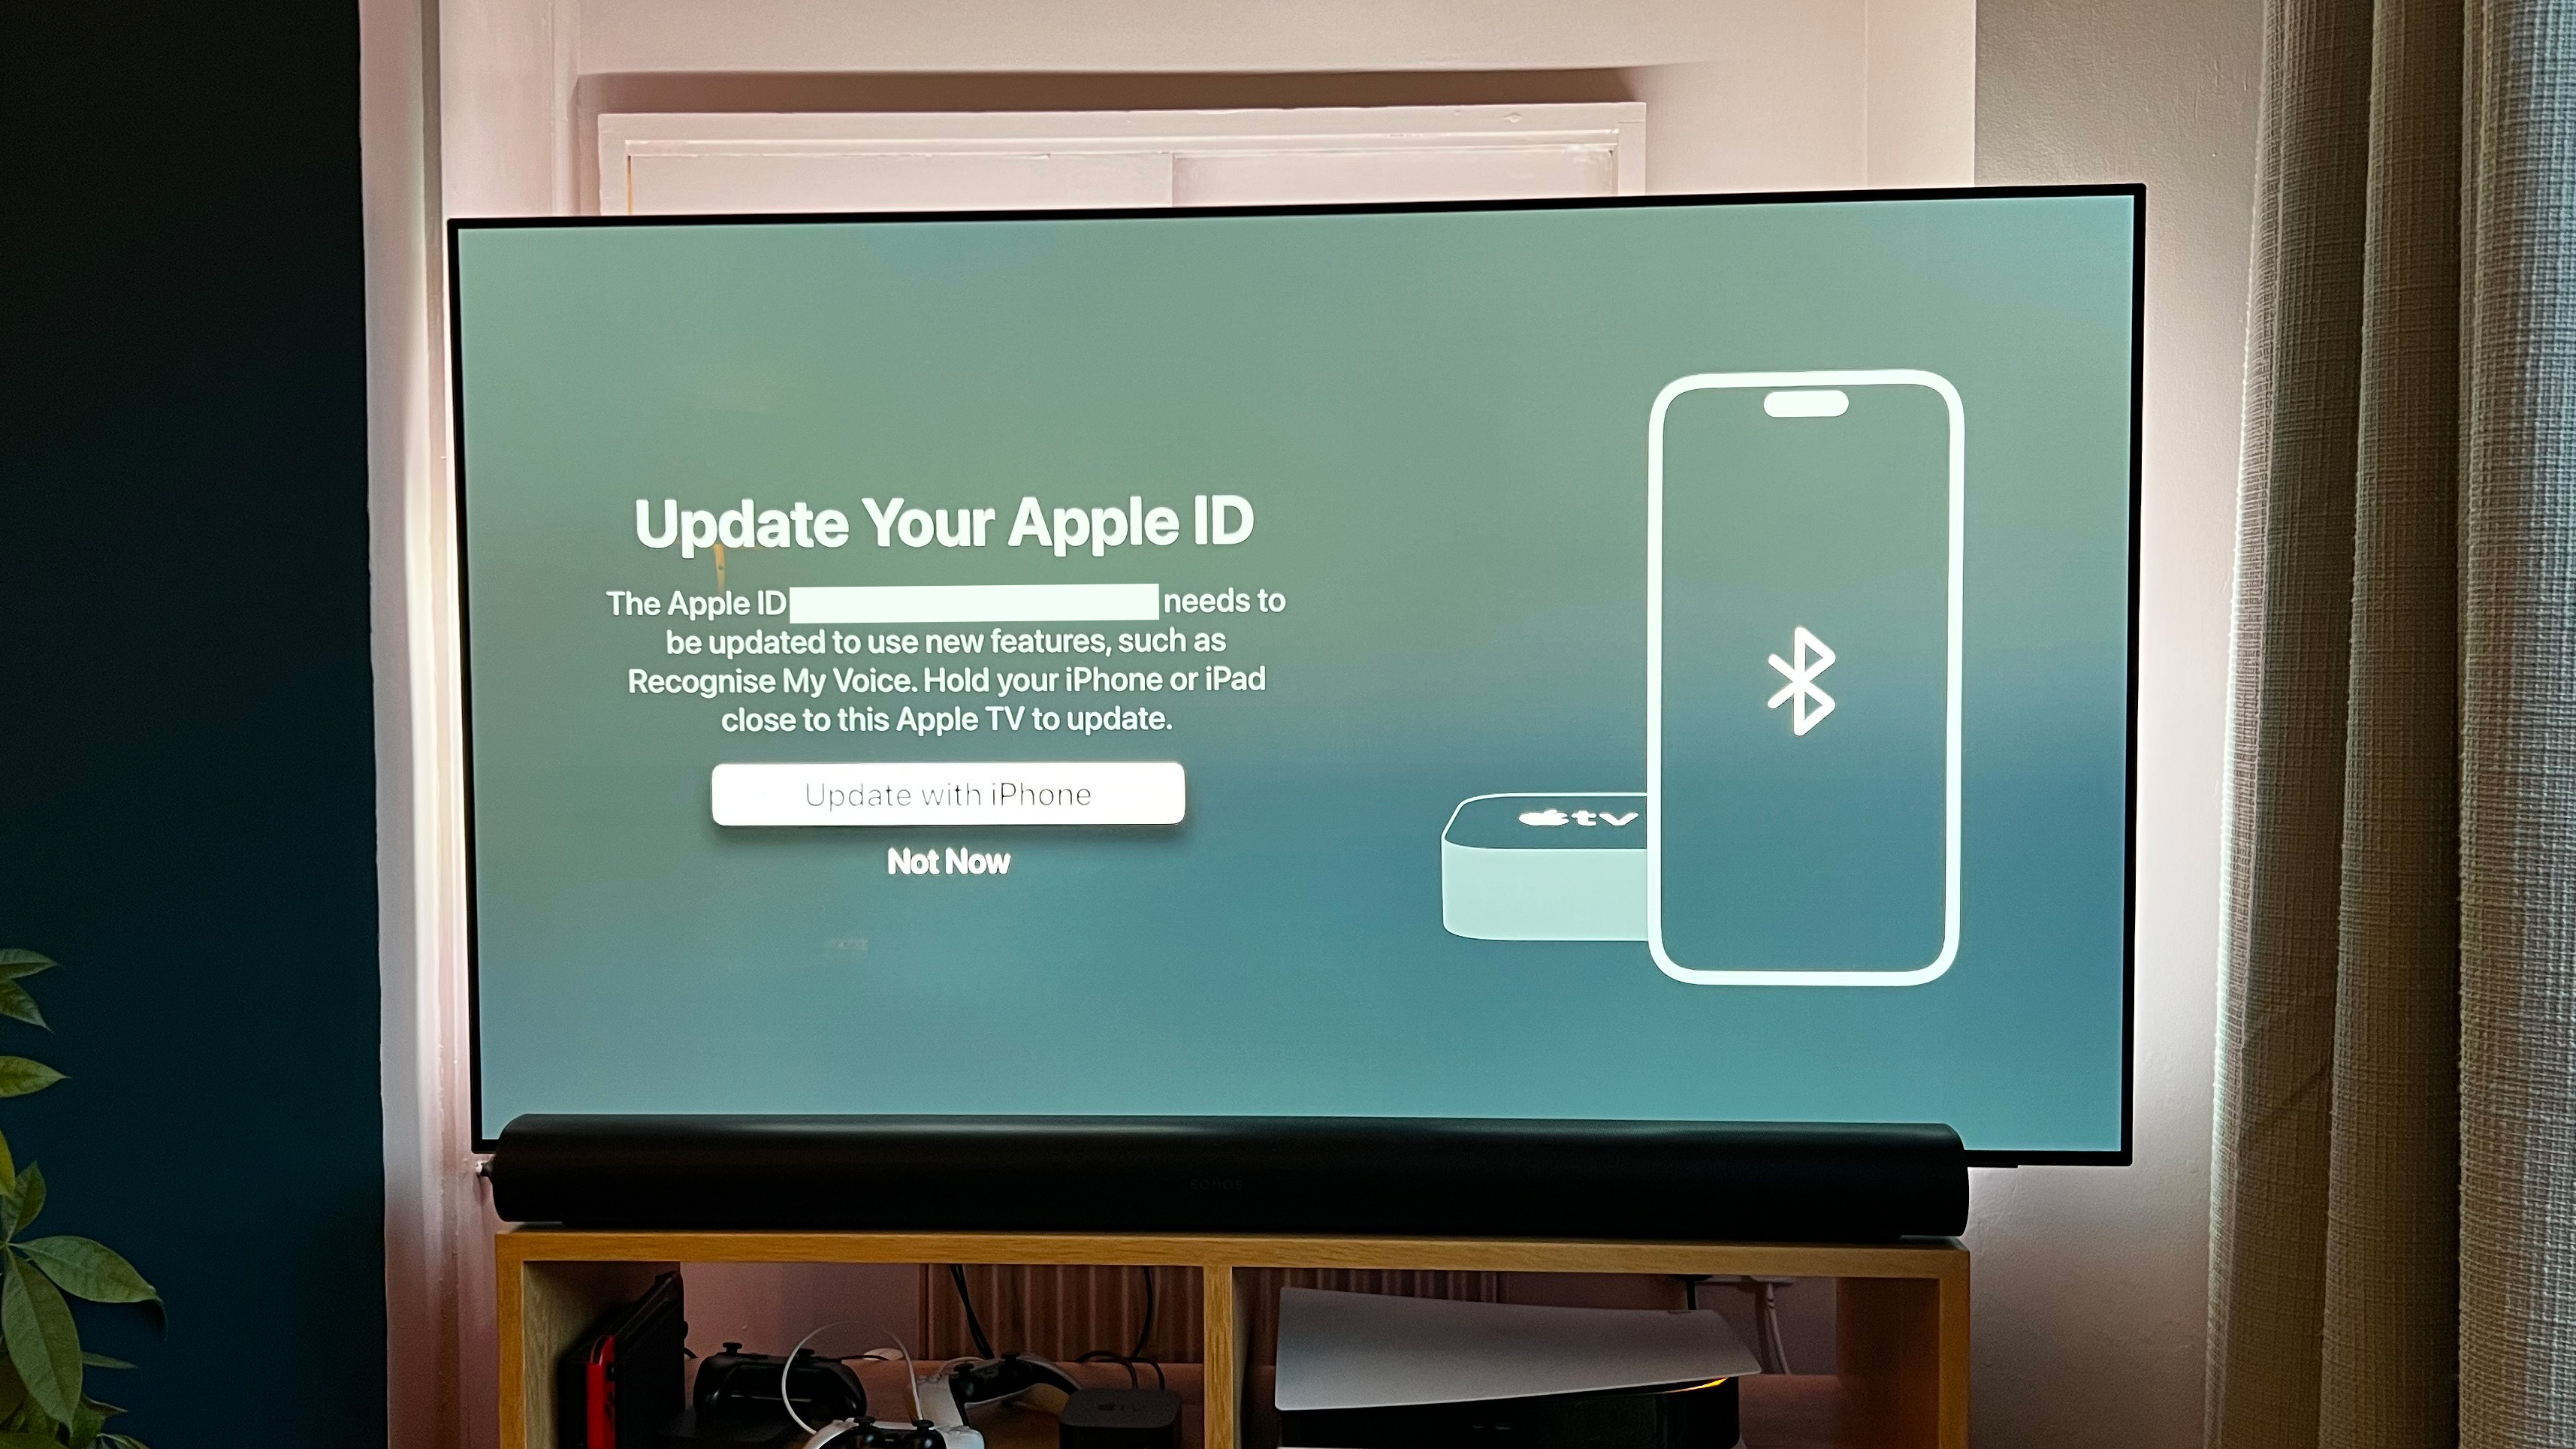 Can I set up an Apple TV 4K without an iPhone?